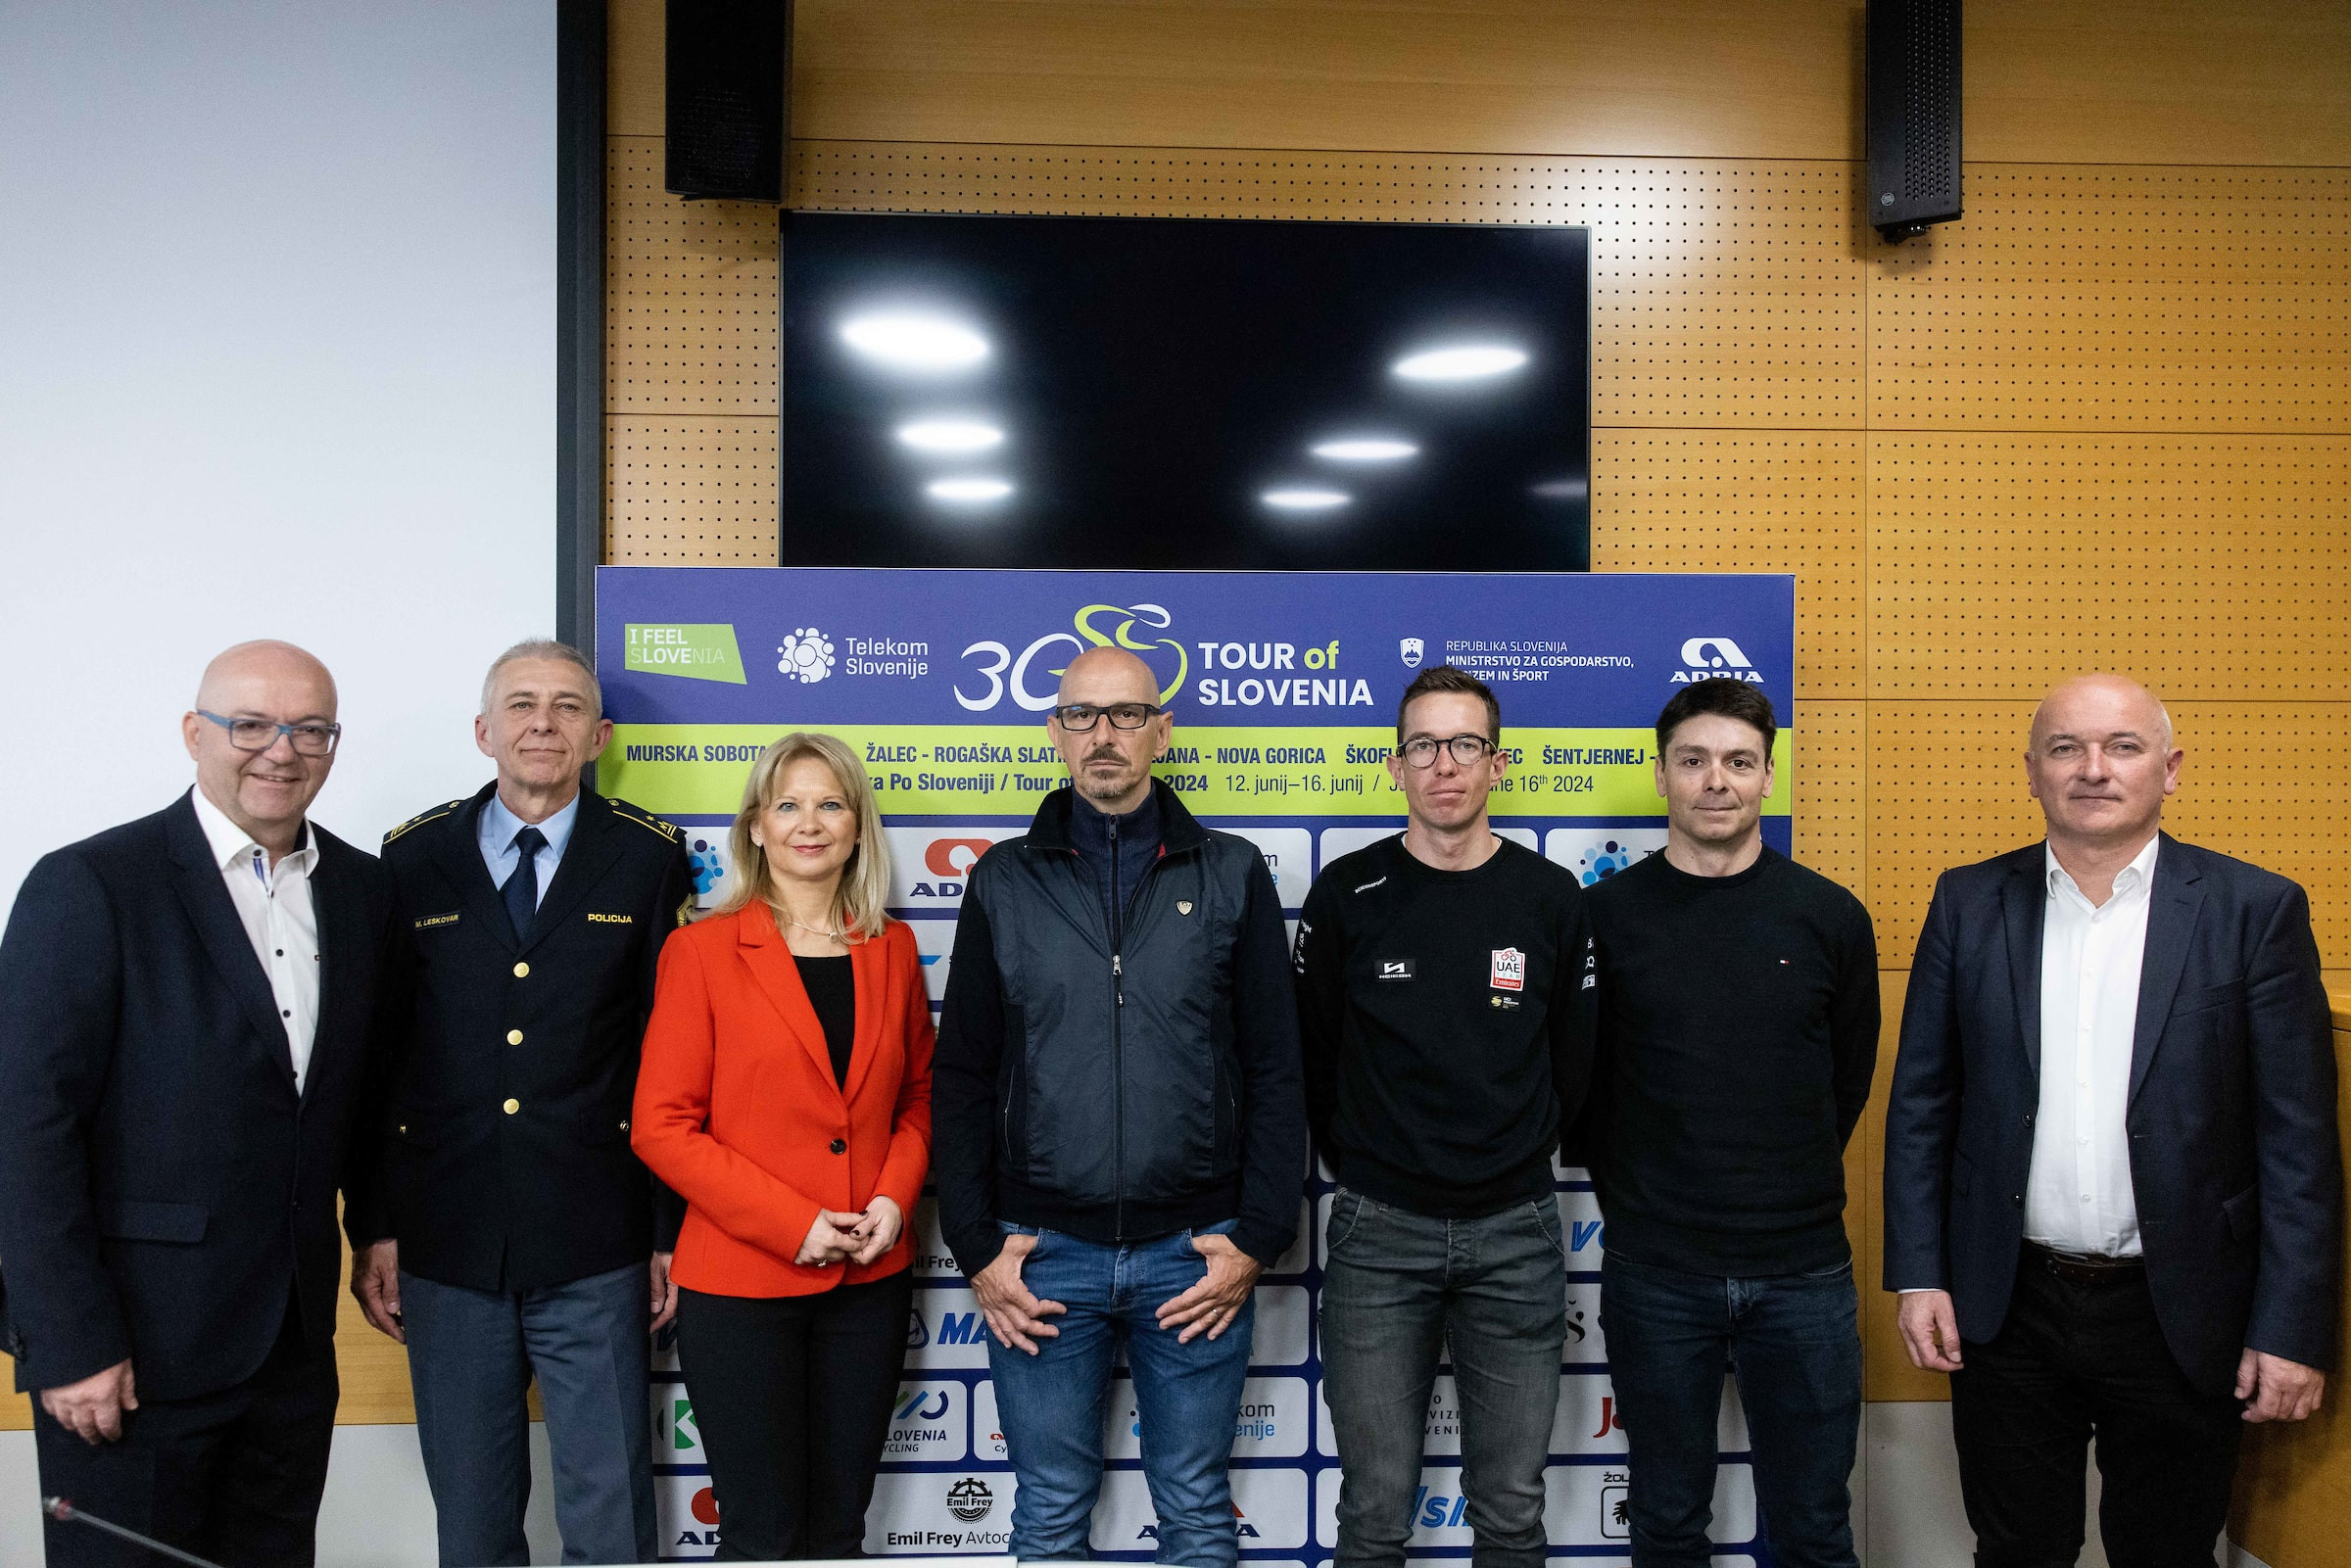 30th edition Tour of Slovenia route revealed